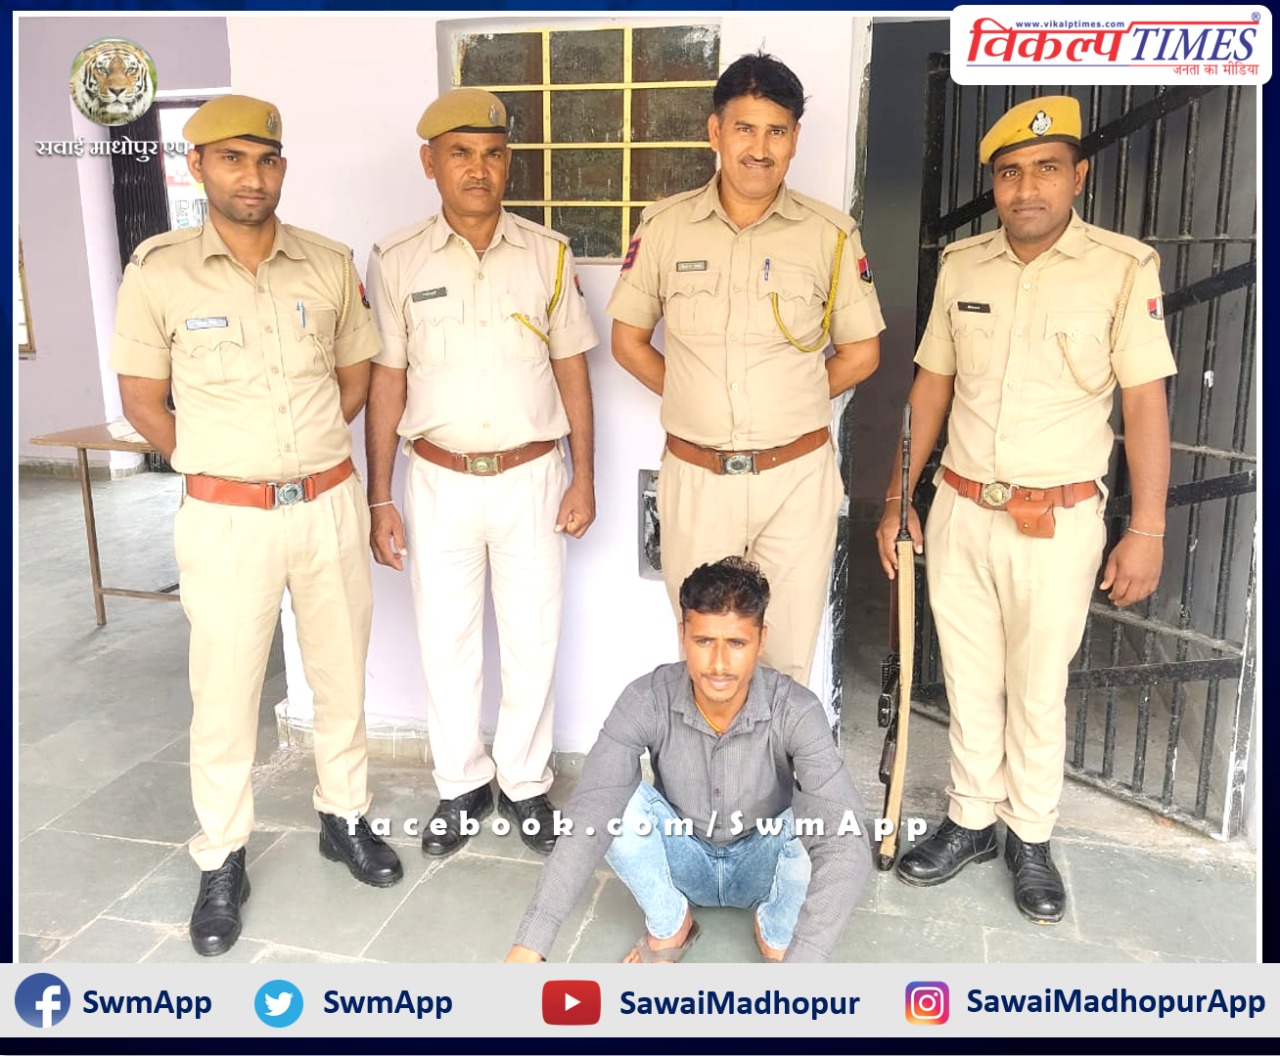 Police arrested accused for molesting a woman in wazirpur sawai madhopur